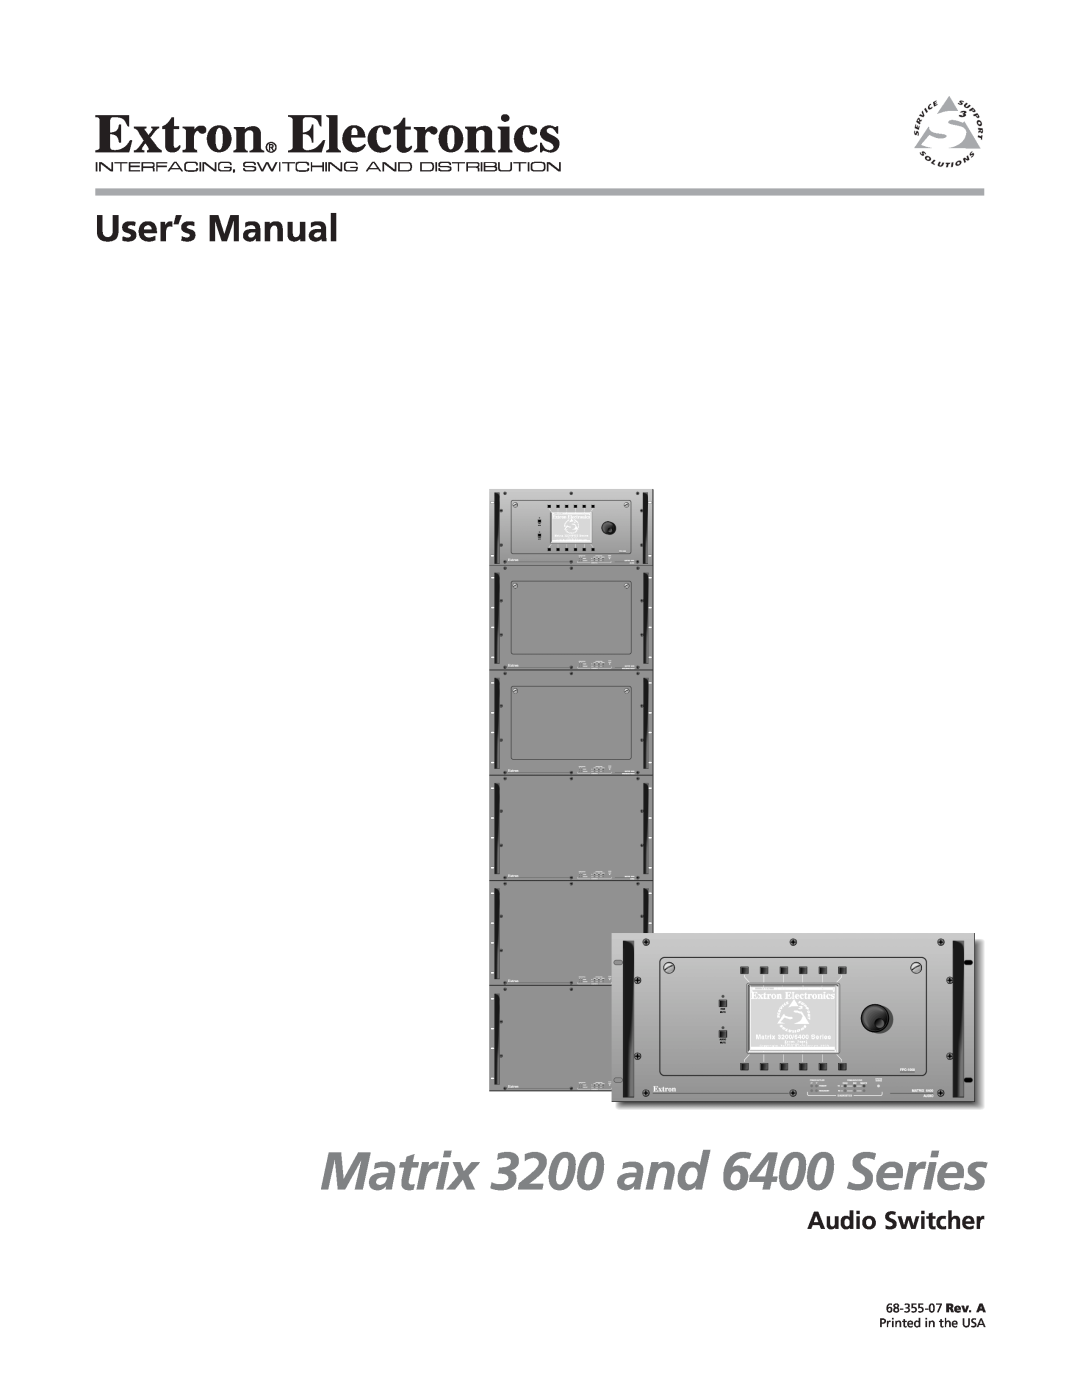 Extron electronic 3200s manual Audio Switcher, Matrix 3200 and 6400 Series, 68-355-07 Rev. A Printed in the USA 